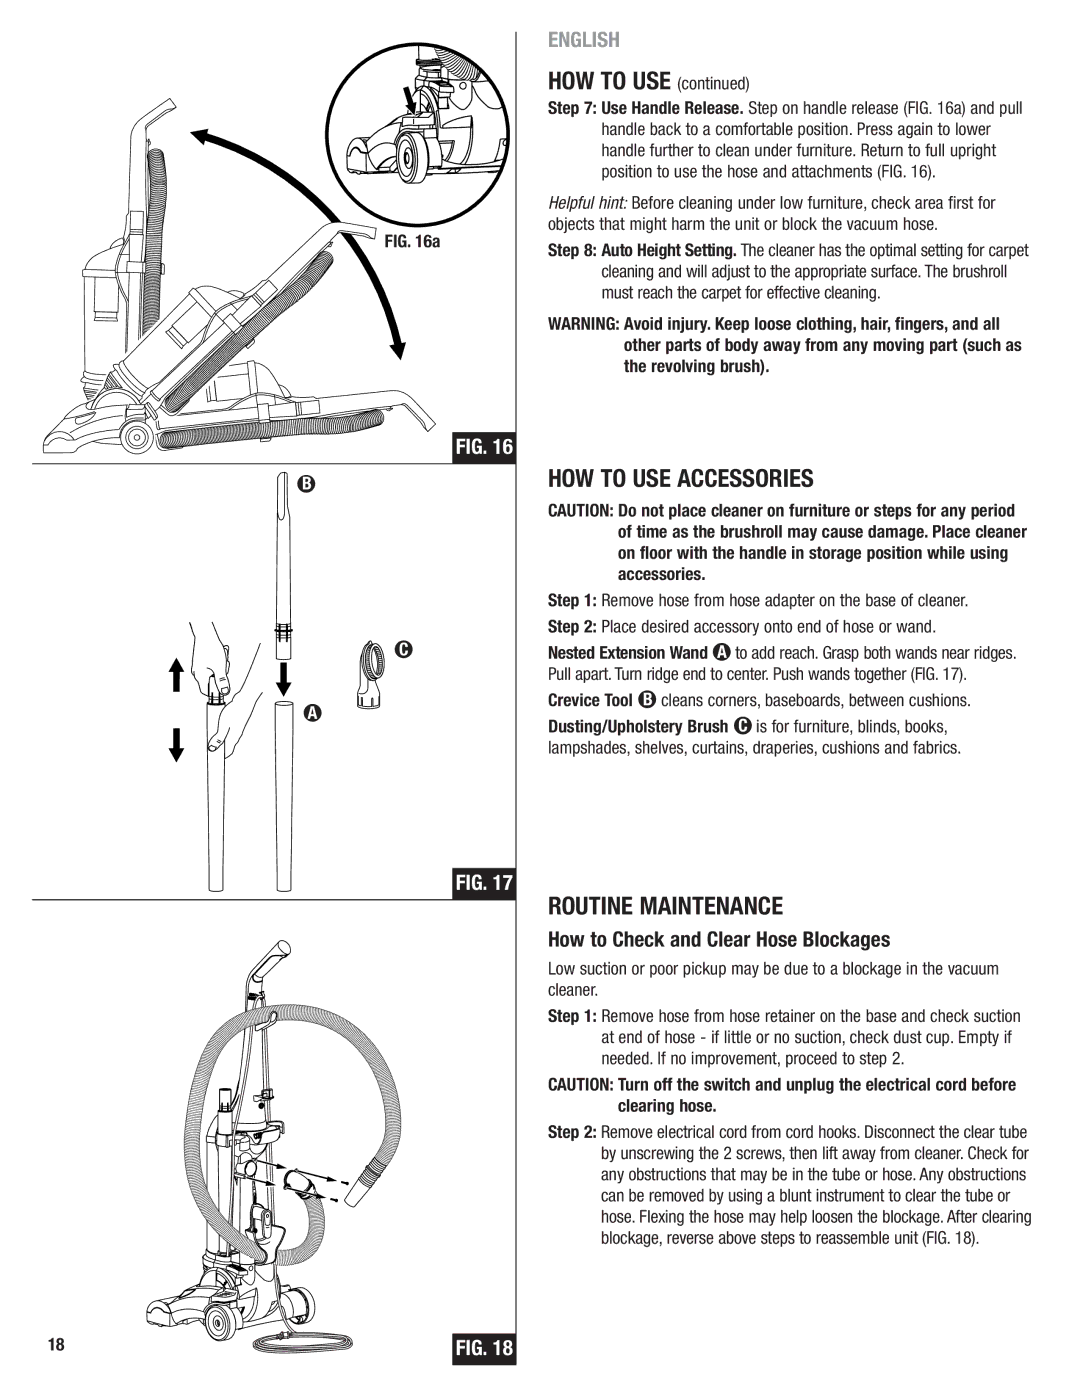 Eureka 4700 Series manual HOW to USE Accessories, Routine Maintenance, How to Check and Clear Hose Blockages 